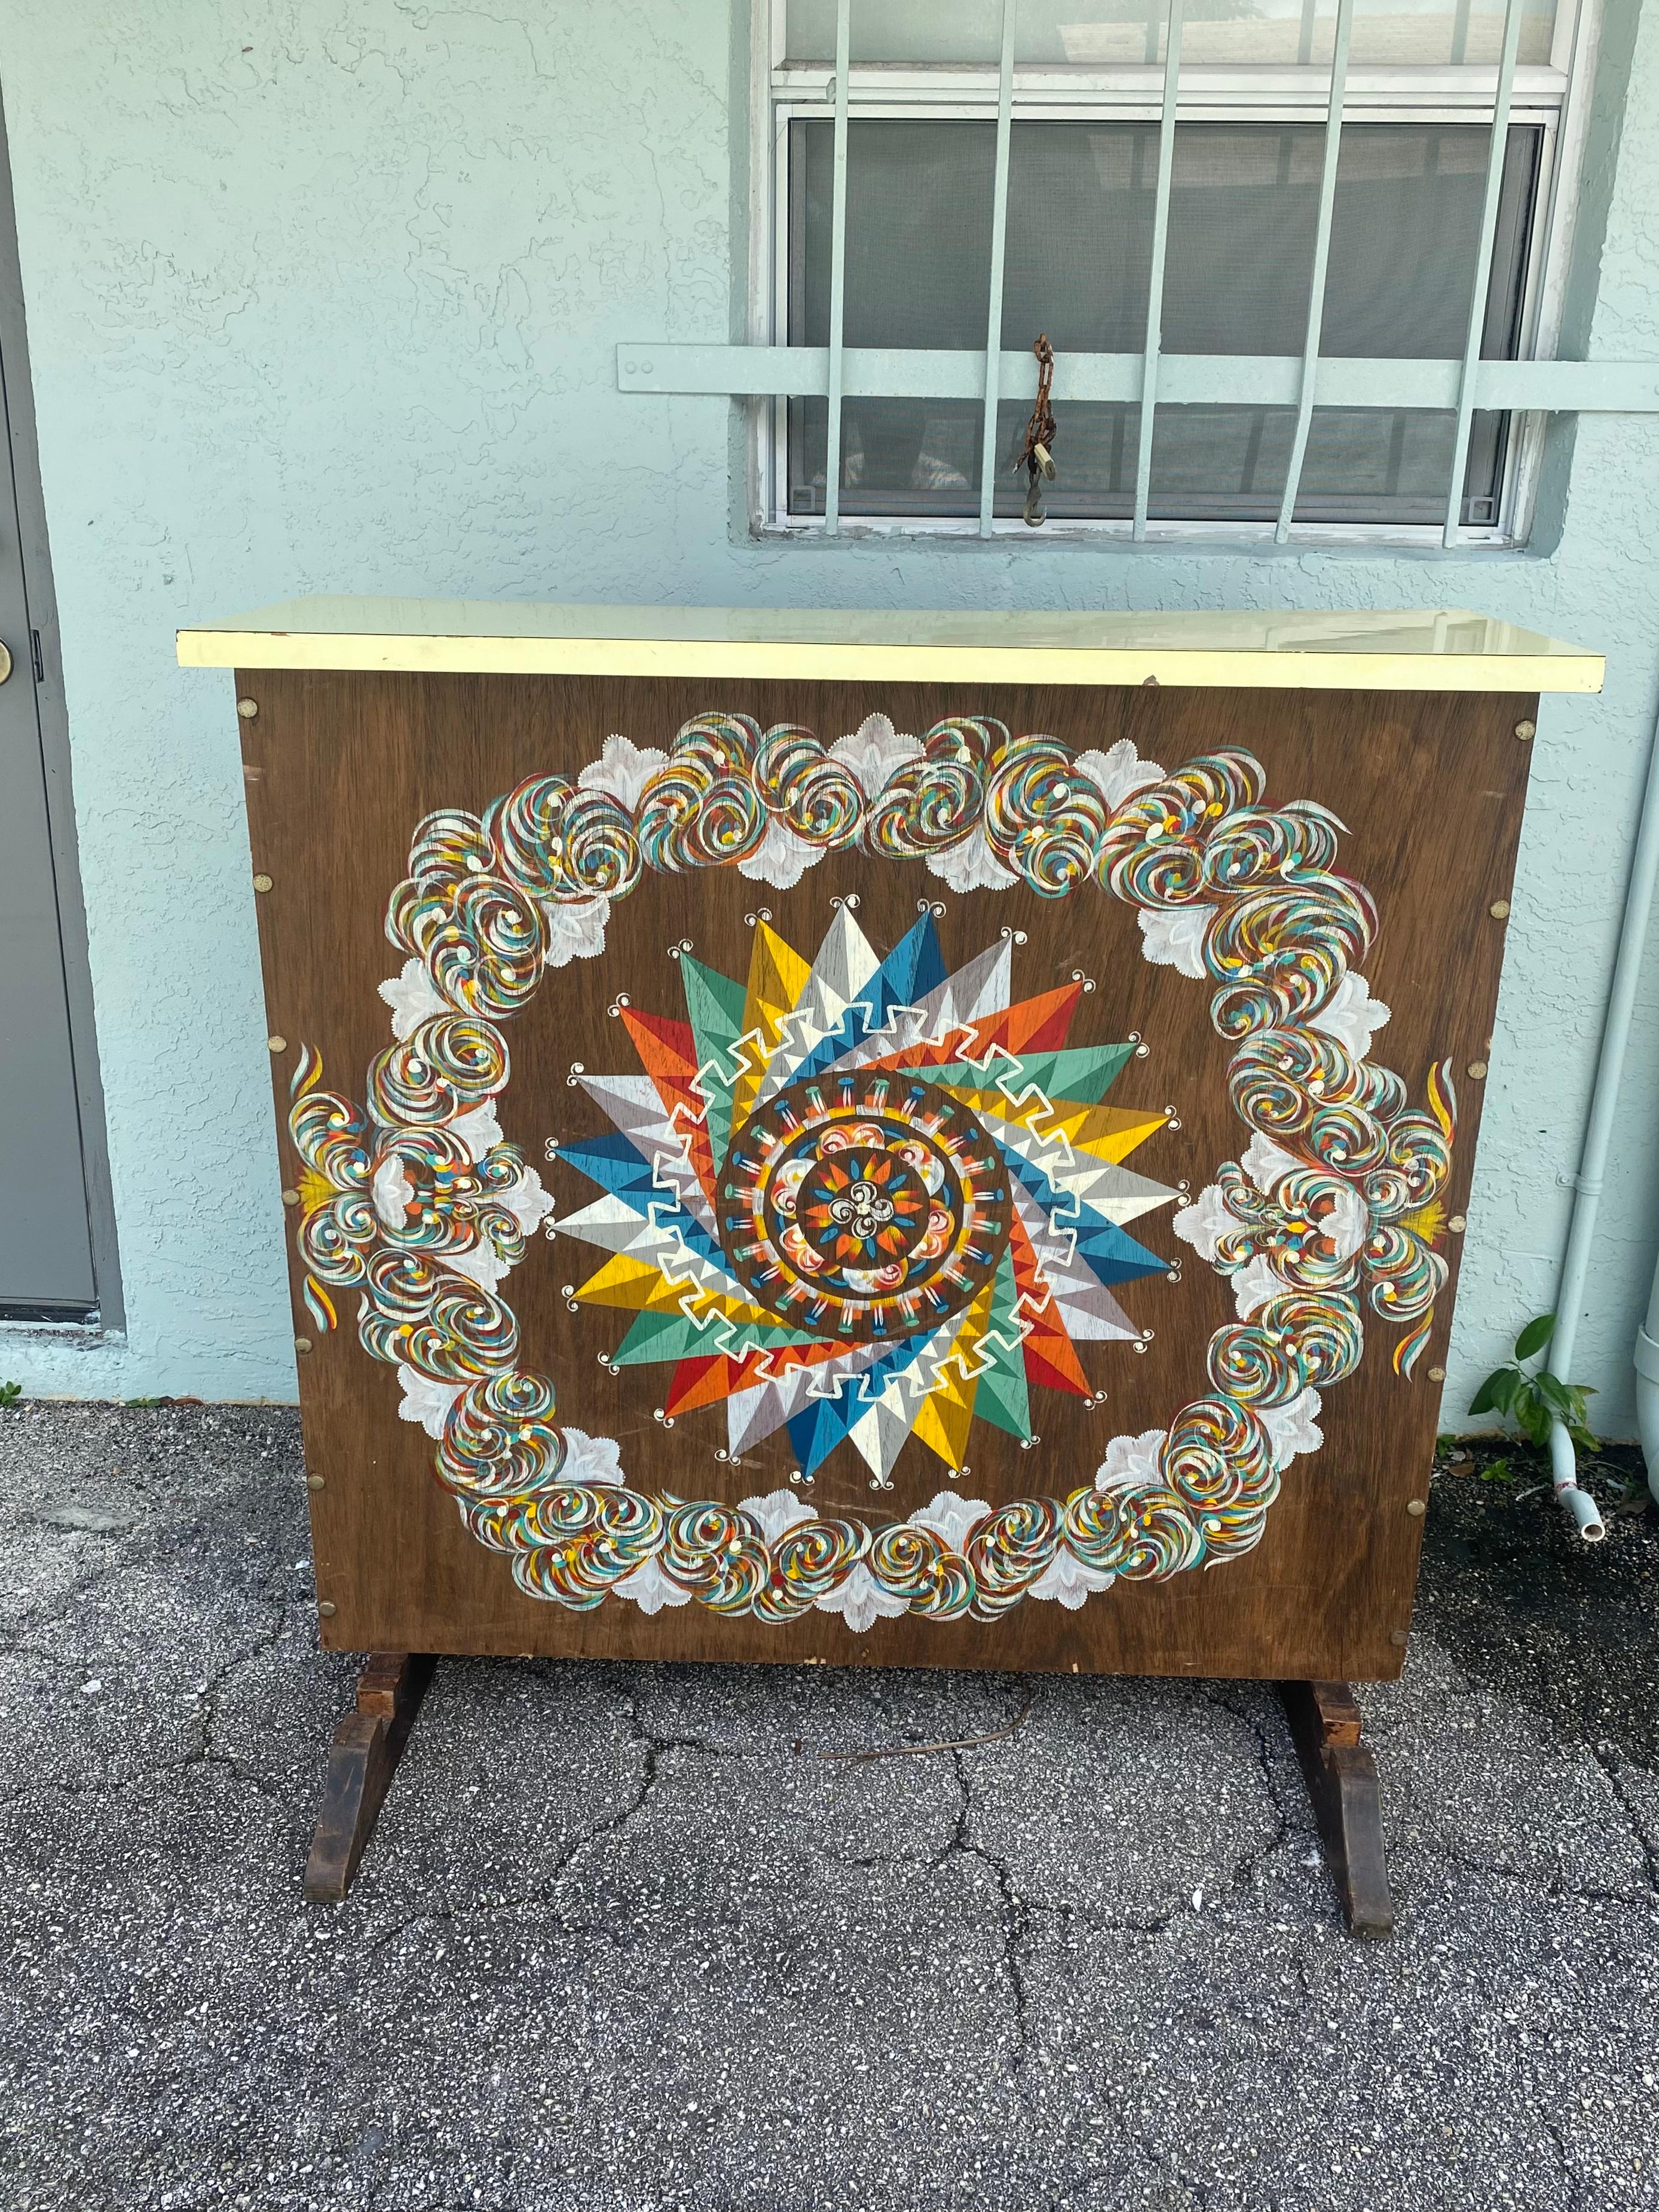 On offer on this occasion is one of the most unique hand painted bar cabinet you could hope to find. This is an ultra-rare opportunity to acquire what is, unequivocally, the best of the best, it being a most spectacular and beautifully-presented